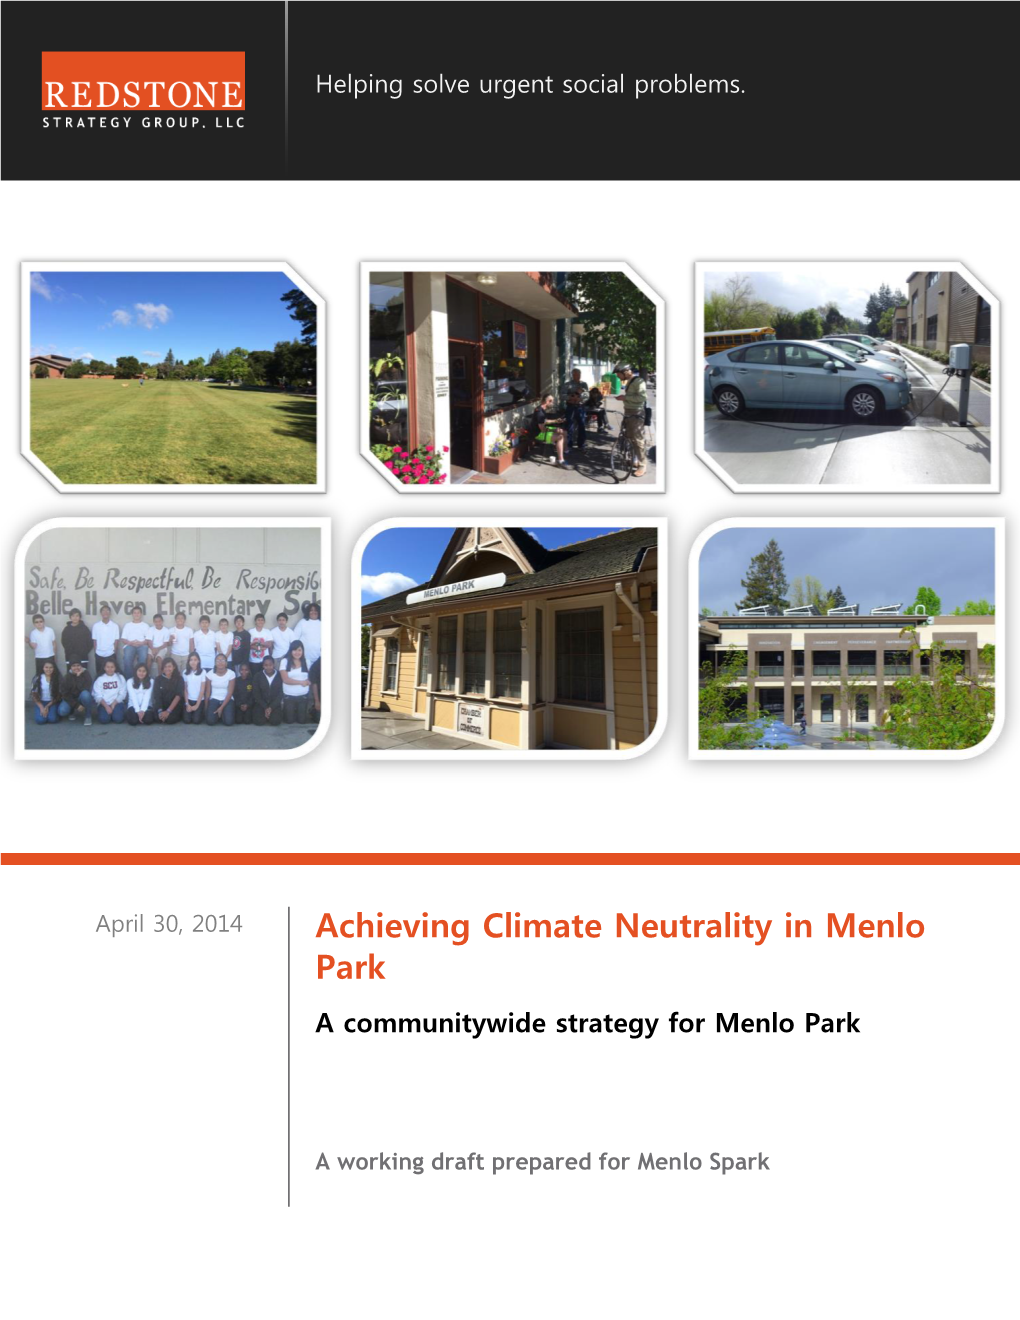 Achieving Climate Neutrality in Menlo Park a Communitywide Strategy for Menlo Park